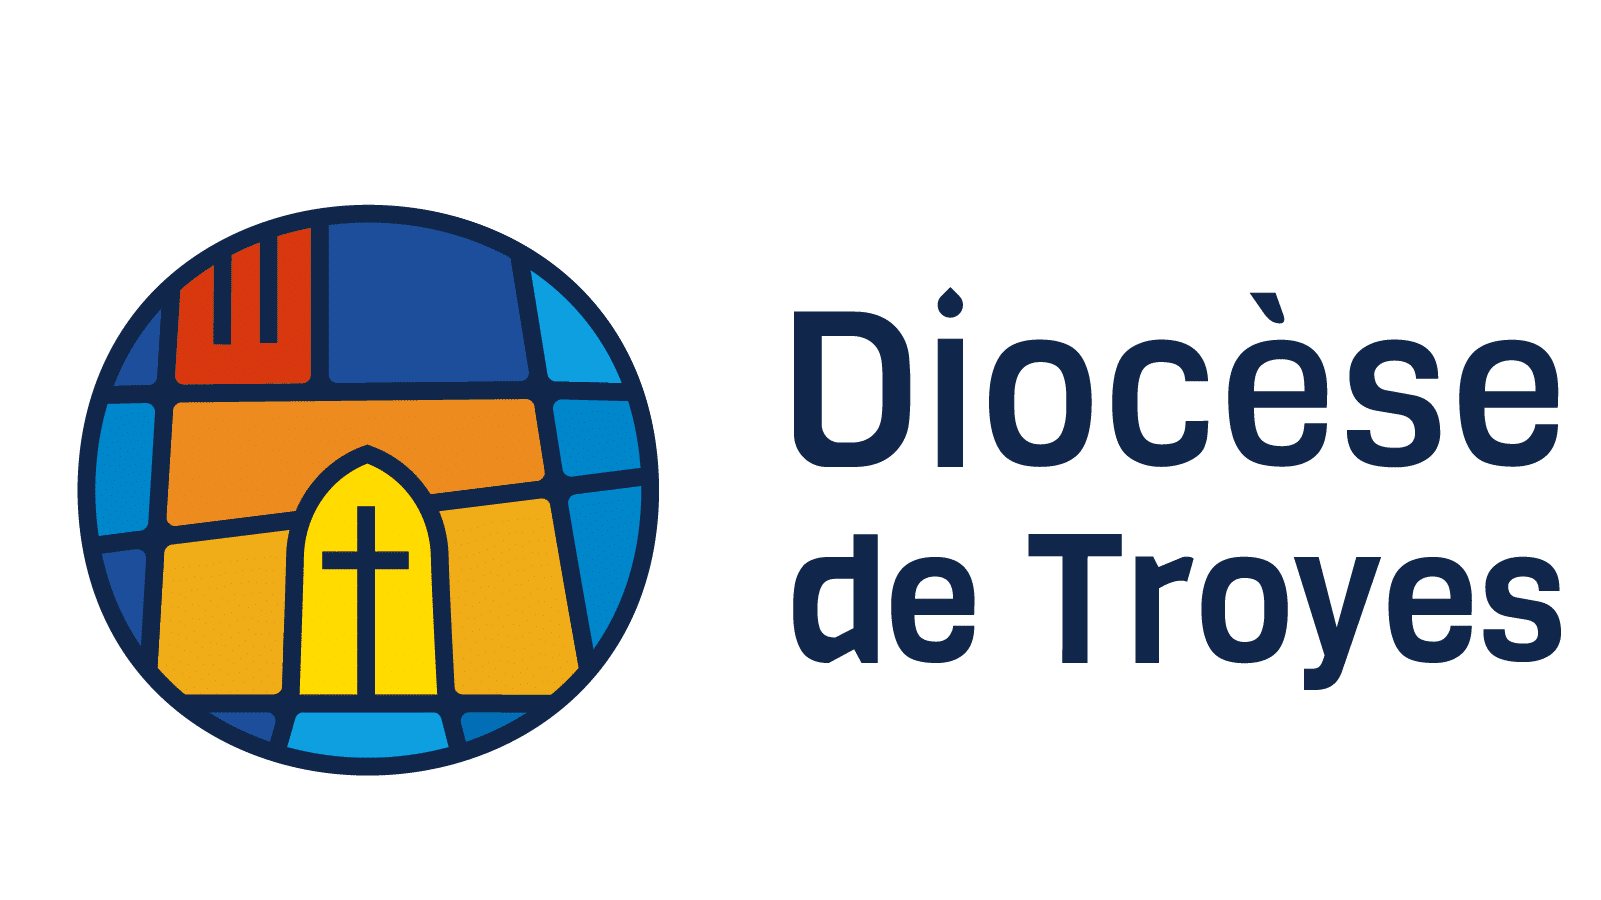 DIOCESE DE TROYES